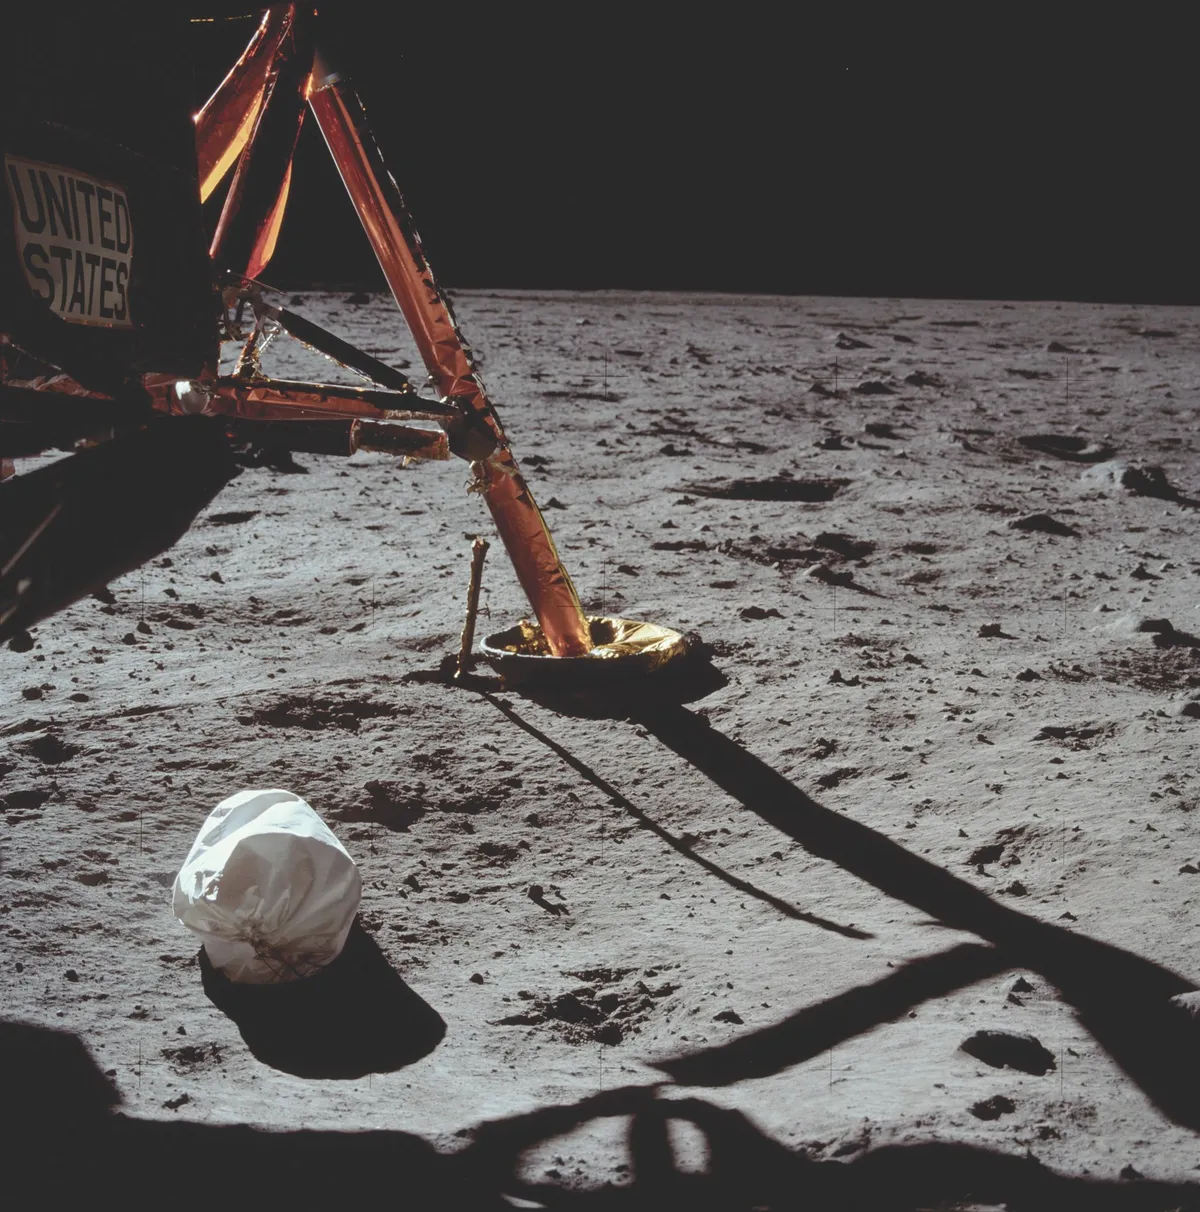 Armstrong’s first photograph on the lunar surface, taken 23 minutes into the moonwalk, shows Eagle’s footpad and strut support, plus a white jettison bag full of rubbish from the lunar module. The bag was left on the surface to free up space in the cramped cabin. © NASA/JPL